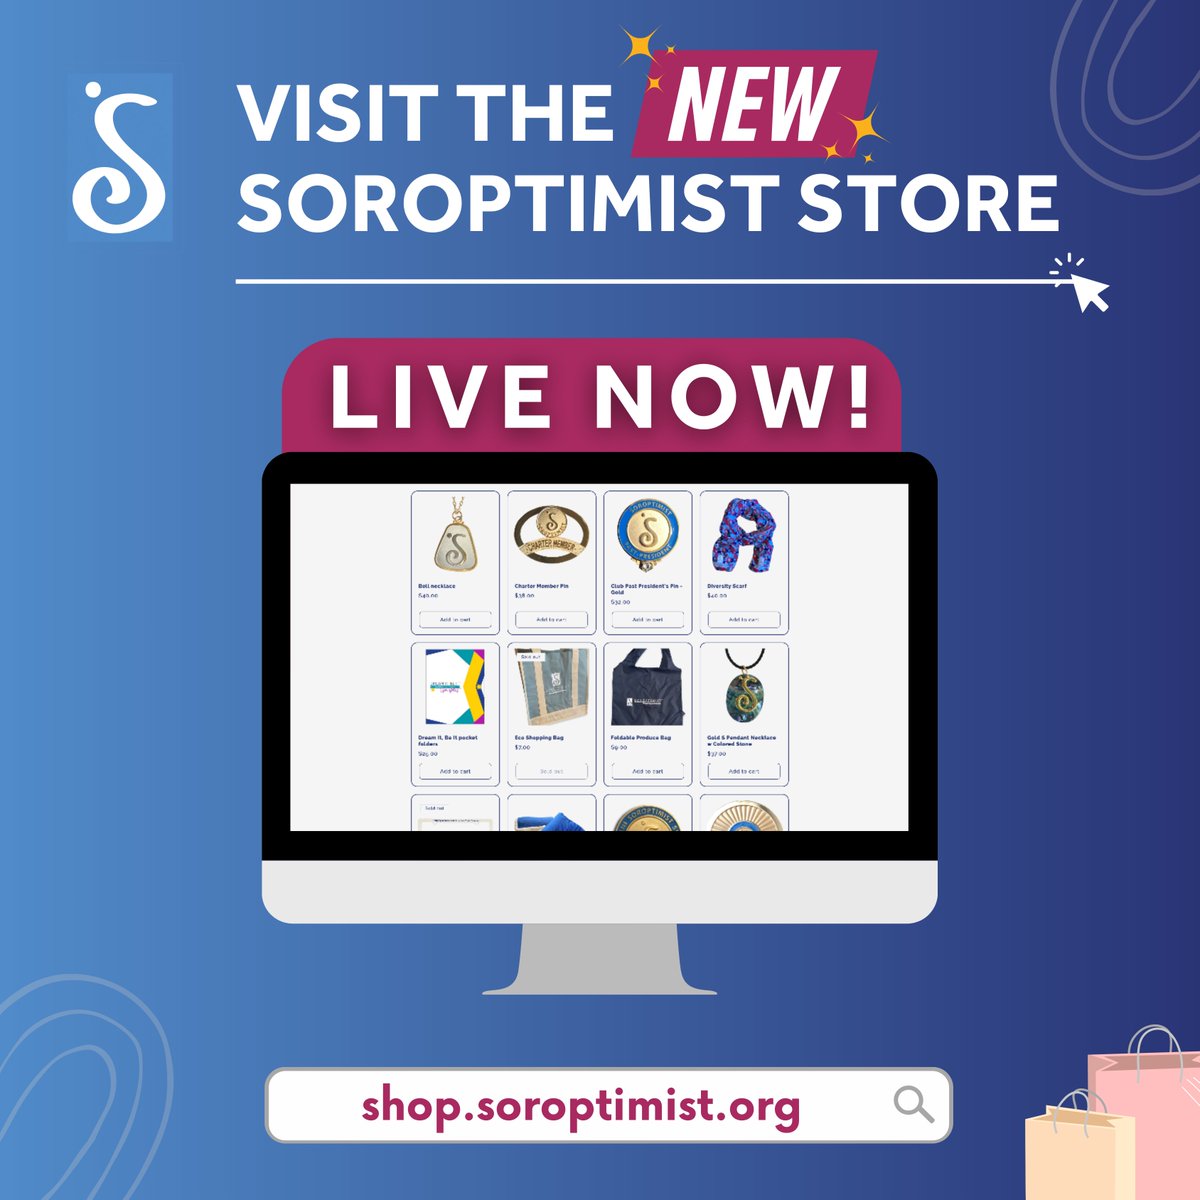 Our new Soroptimist Store is officially open for business! 🛍️ Experience the user-friendly platform, tailored to make your online shopping experience a breeze. Shop Now: shop.soroptimist.org